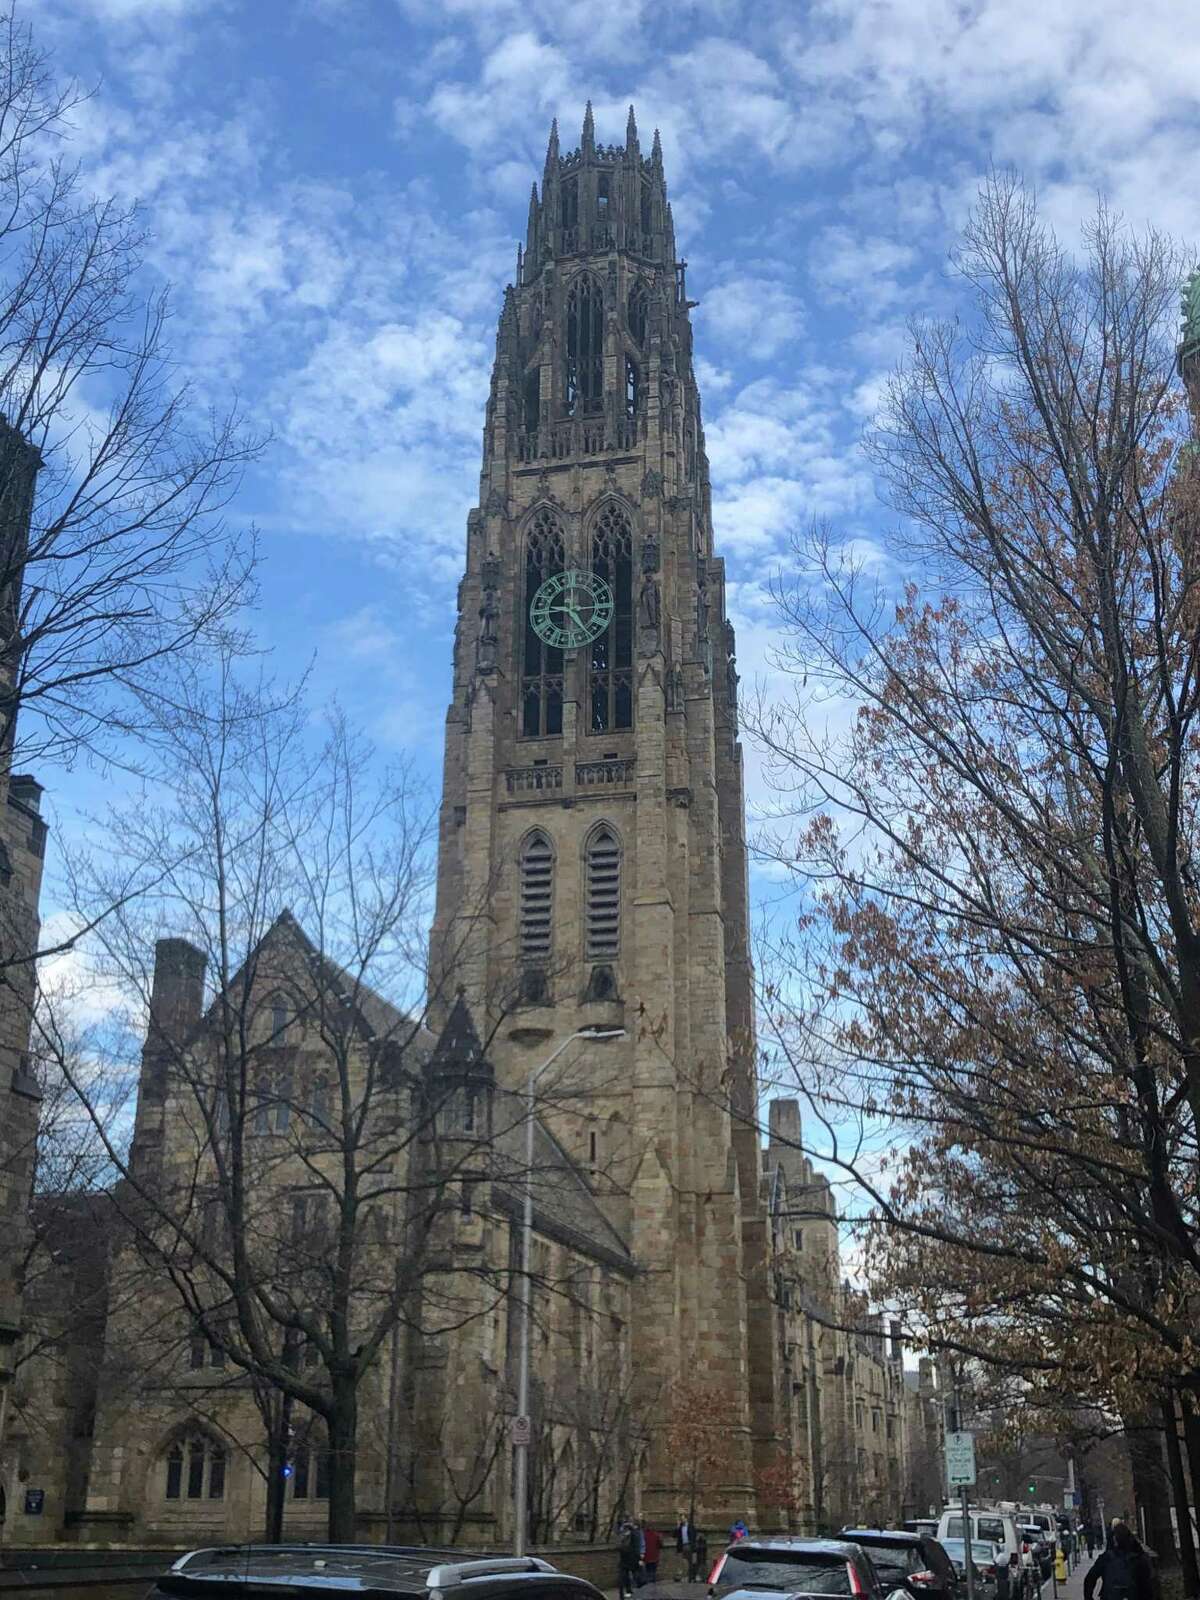 Harkness Tower, home of the Yale Memorial Carillon, at Yale University on High Street in New Haven, Connecticut.